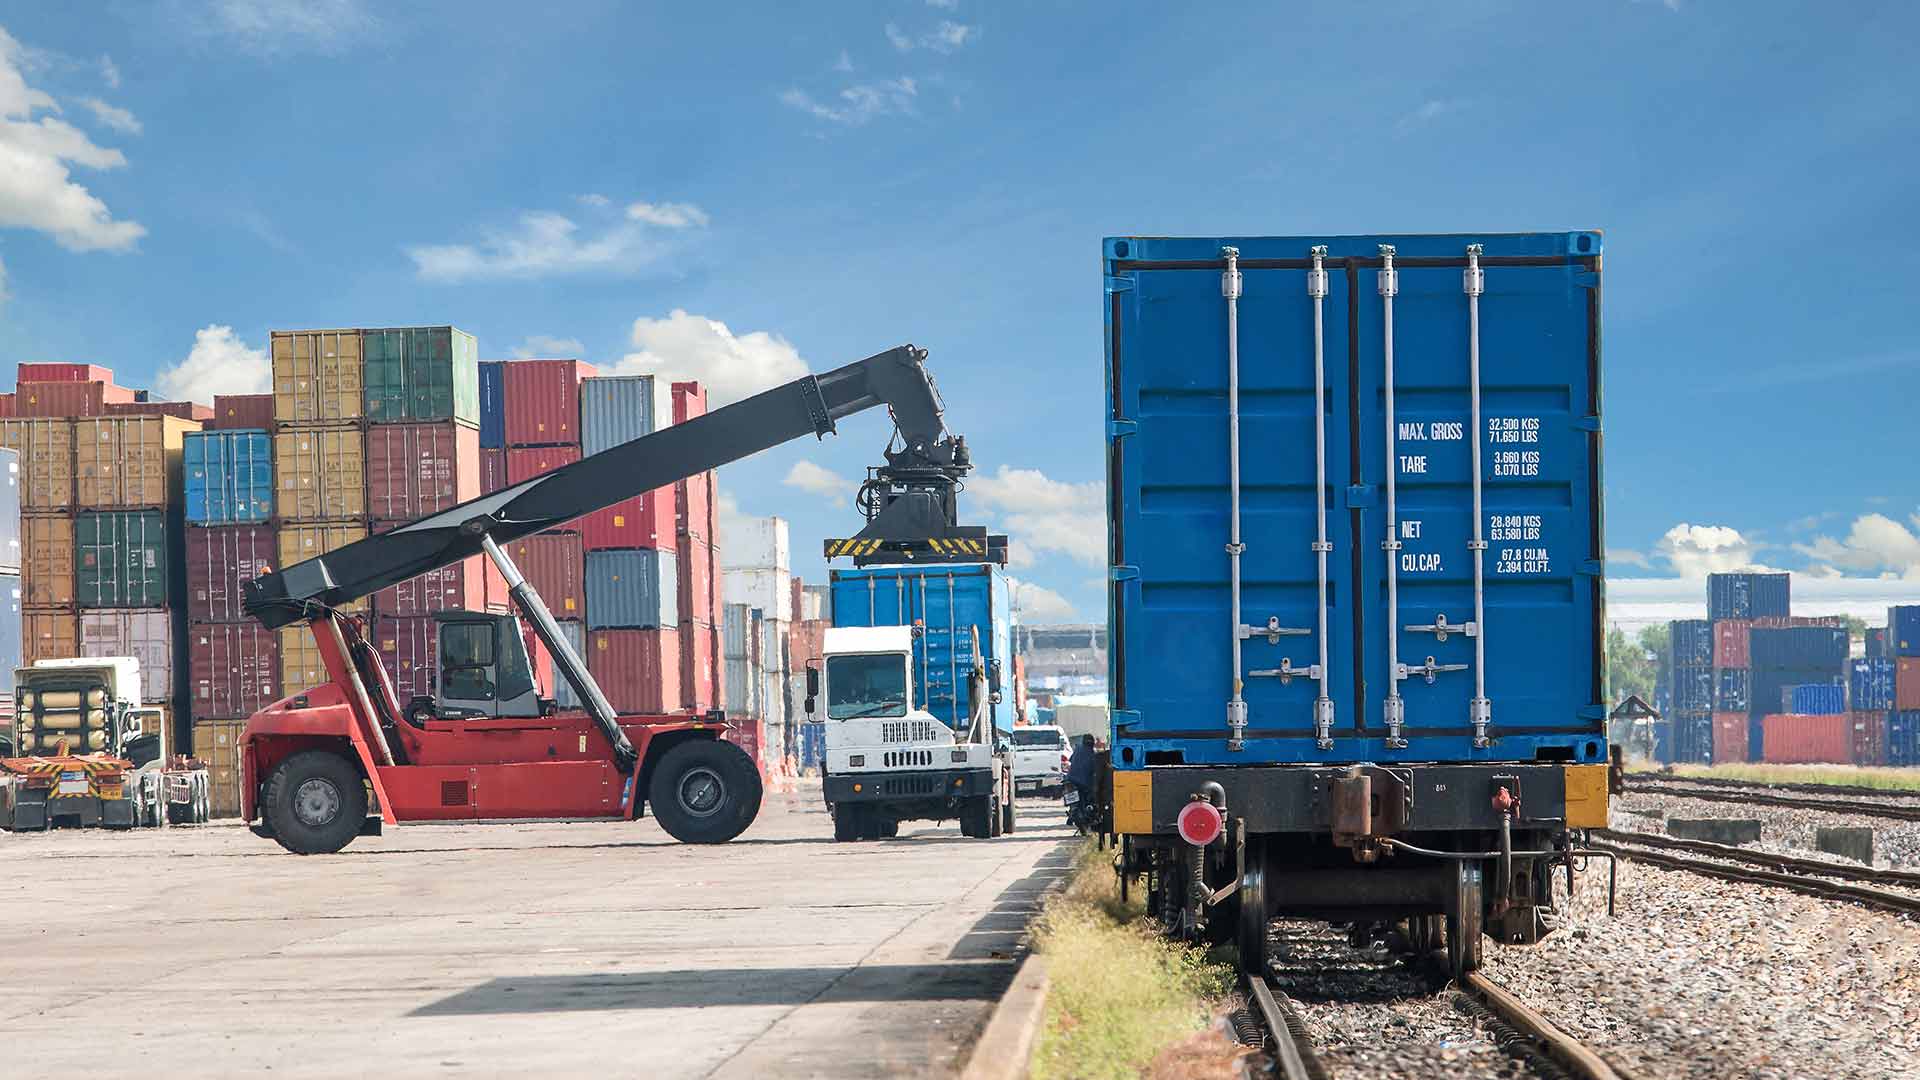 Cargo containers being moved from freight truck to freight train for transport at port